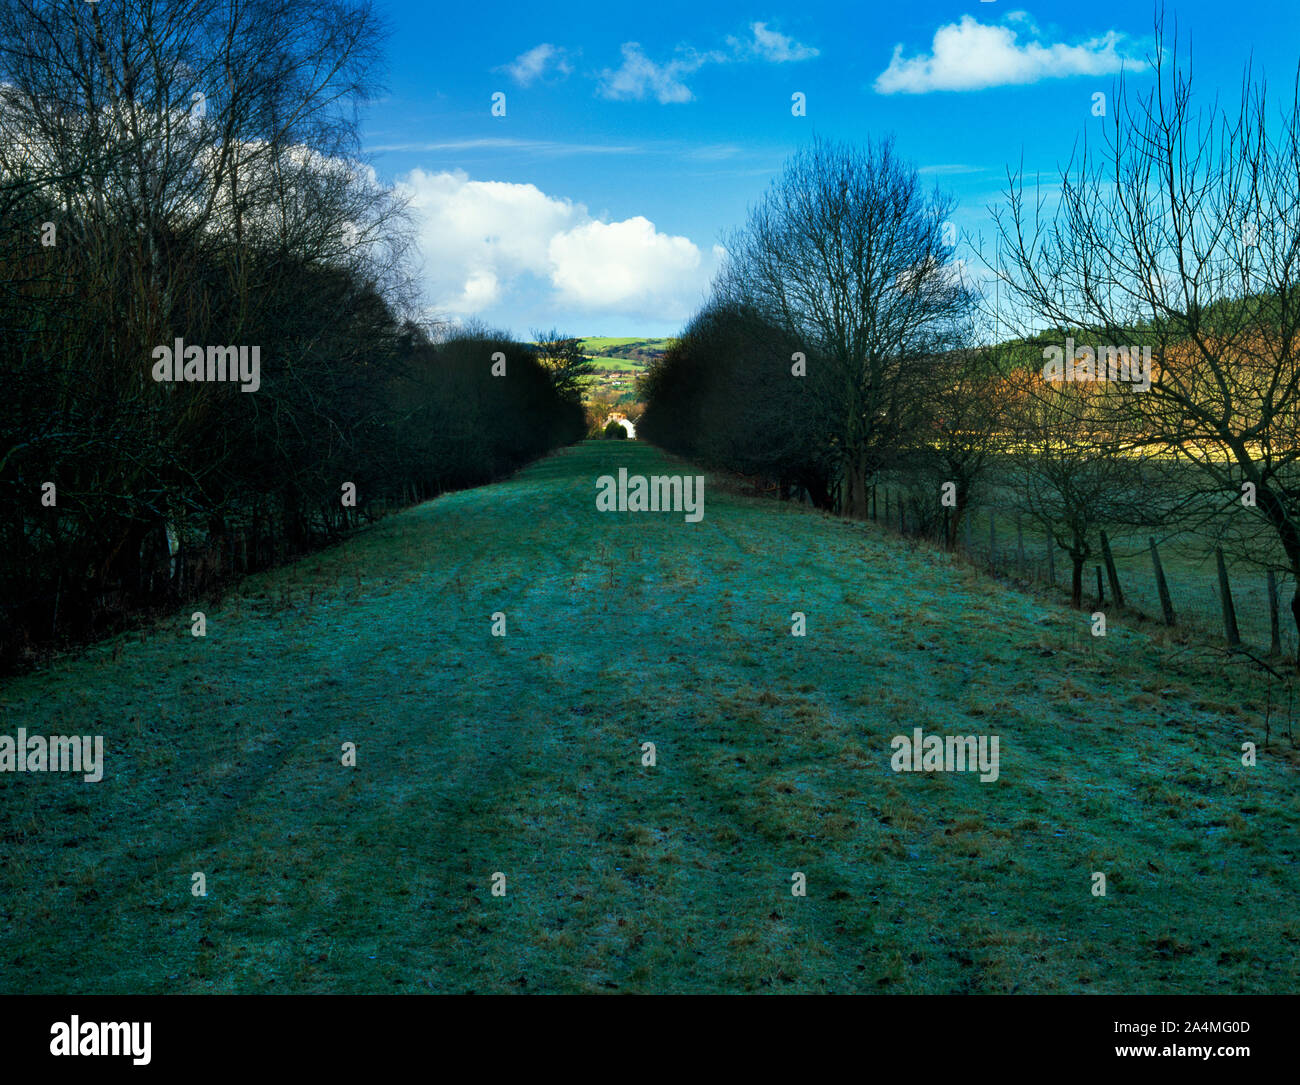 View NW from Old Pandy Mill along the embankment of the former Mold and Denbigh Junction Railway at Afon-wen, Flintshire, Wales, UK. Stock Photo